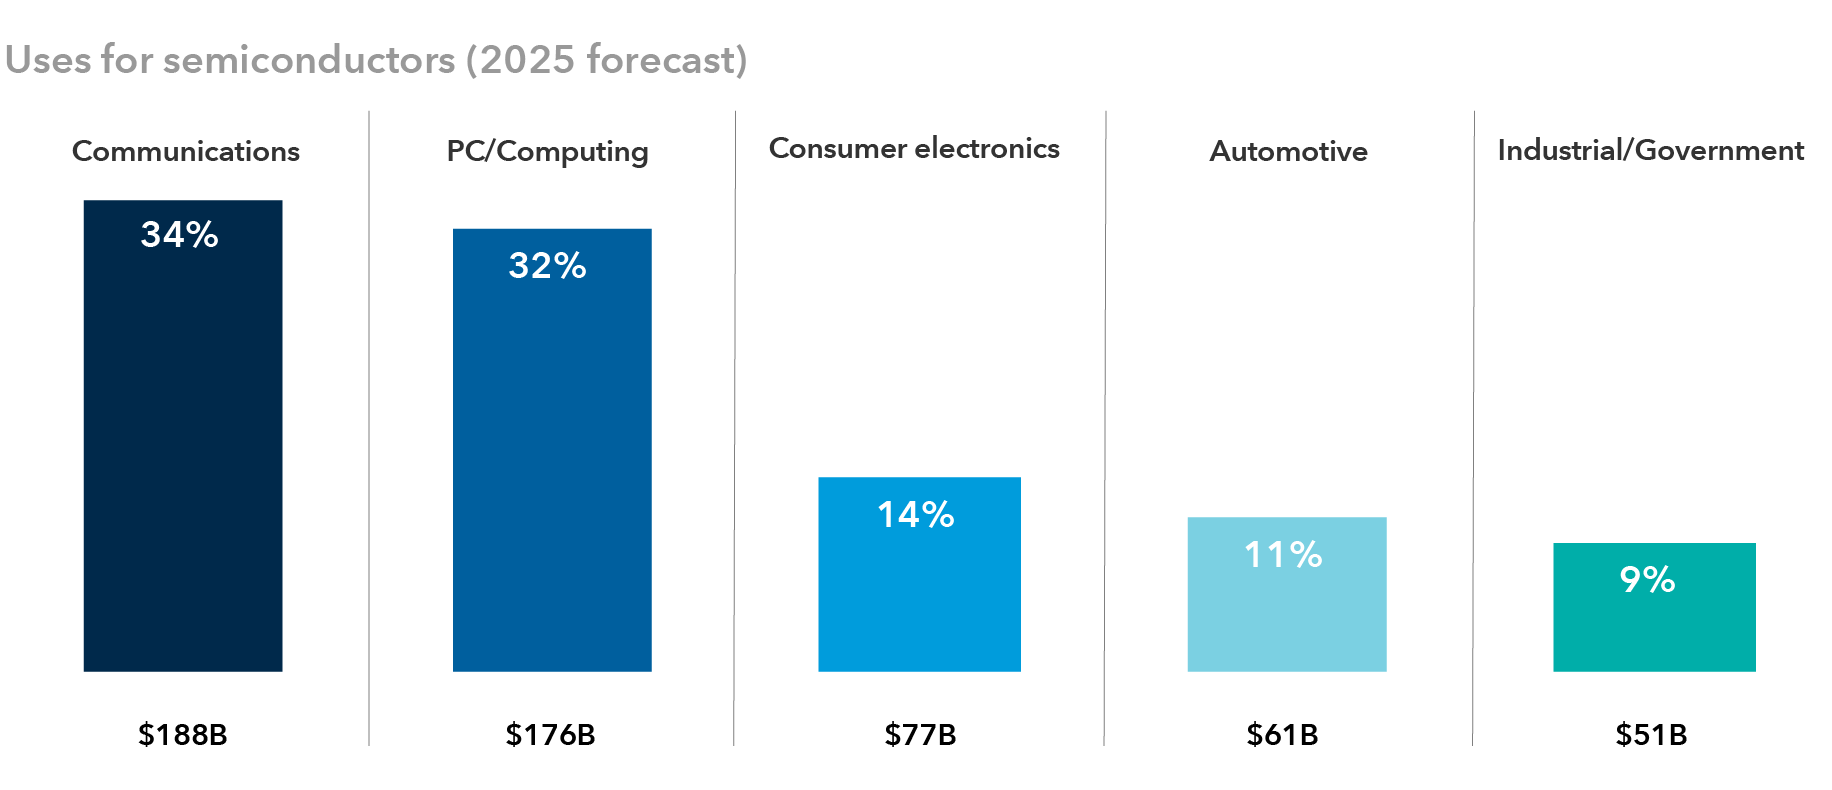 Chart shows a 2025 forecast for uses of semiconductors. Communications chips are forecast to reach sales of $188 billion. PC/Computing chip sales are forecast at $176 billion. Consumer electronics chip sales are forecast at $77 billion. Automotive chip sales are forecast at $61 billion. Industrial/Government chip sales are forecast at $51 billion. Source: Bloomberg. Data represent the share of all semiconductor device applications in 2025, as forecast by Bloomberg.